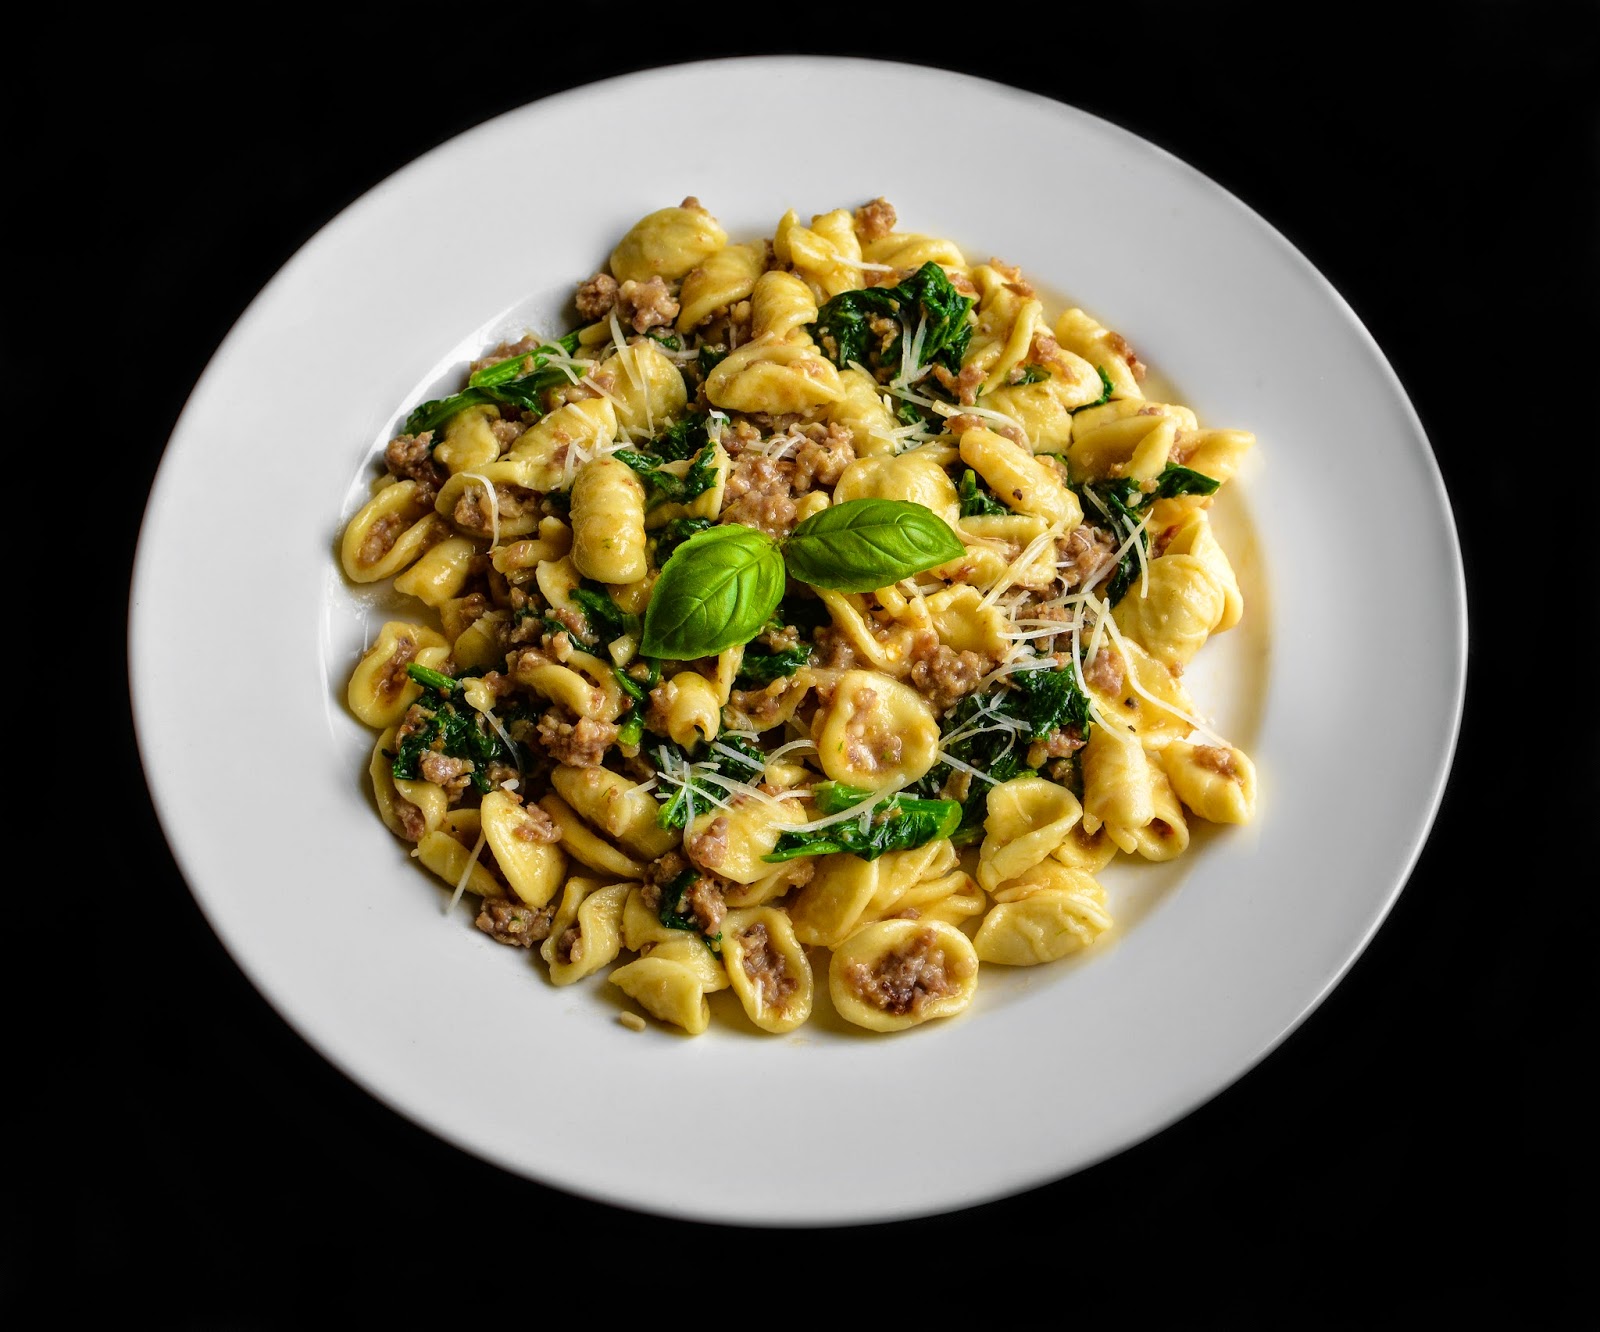 ORECCHIETTE WITH BROCCOLI RABE AND ITALIAN SAUSAGE from All Food Considered 